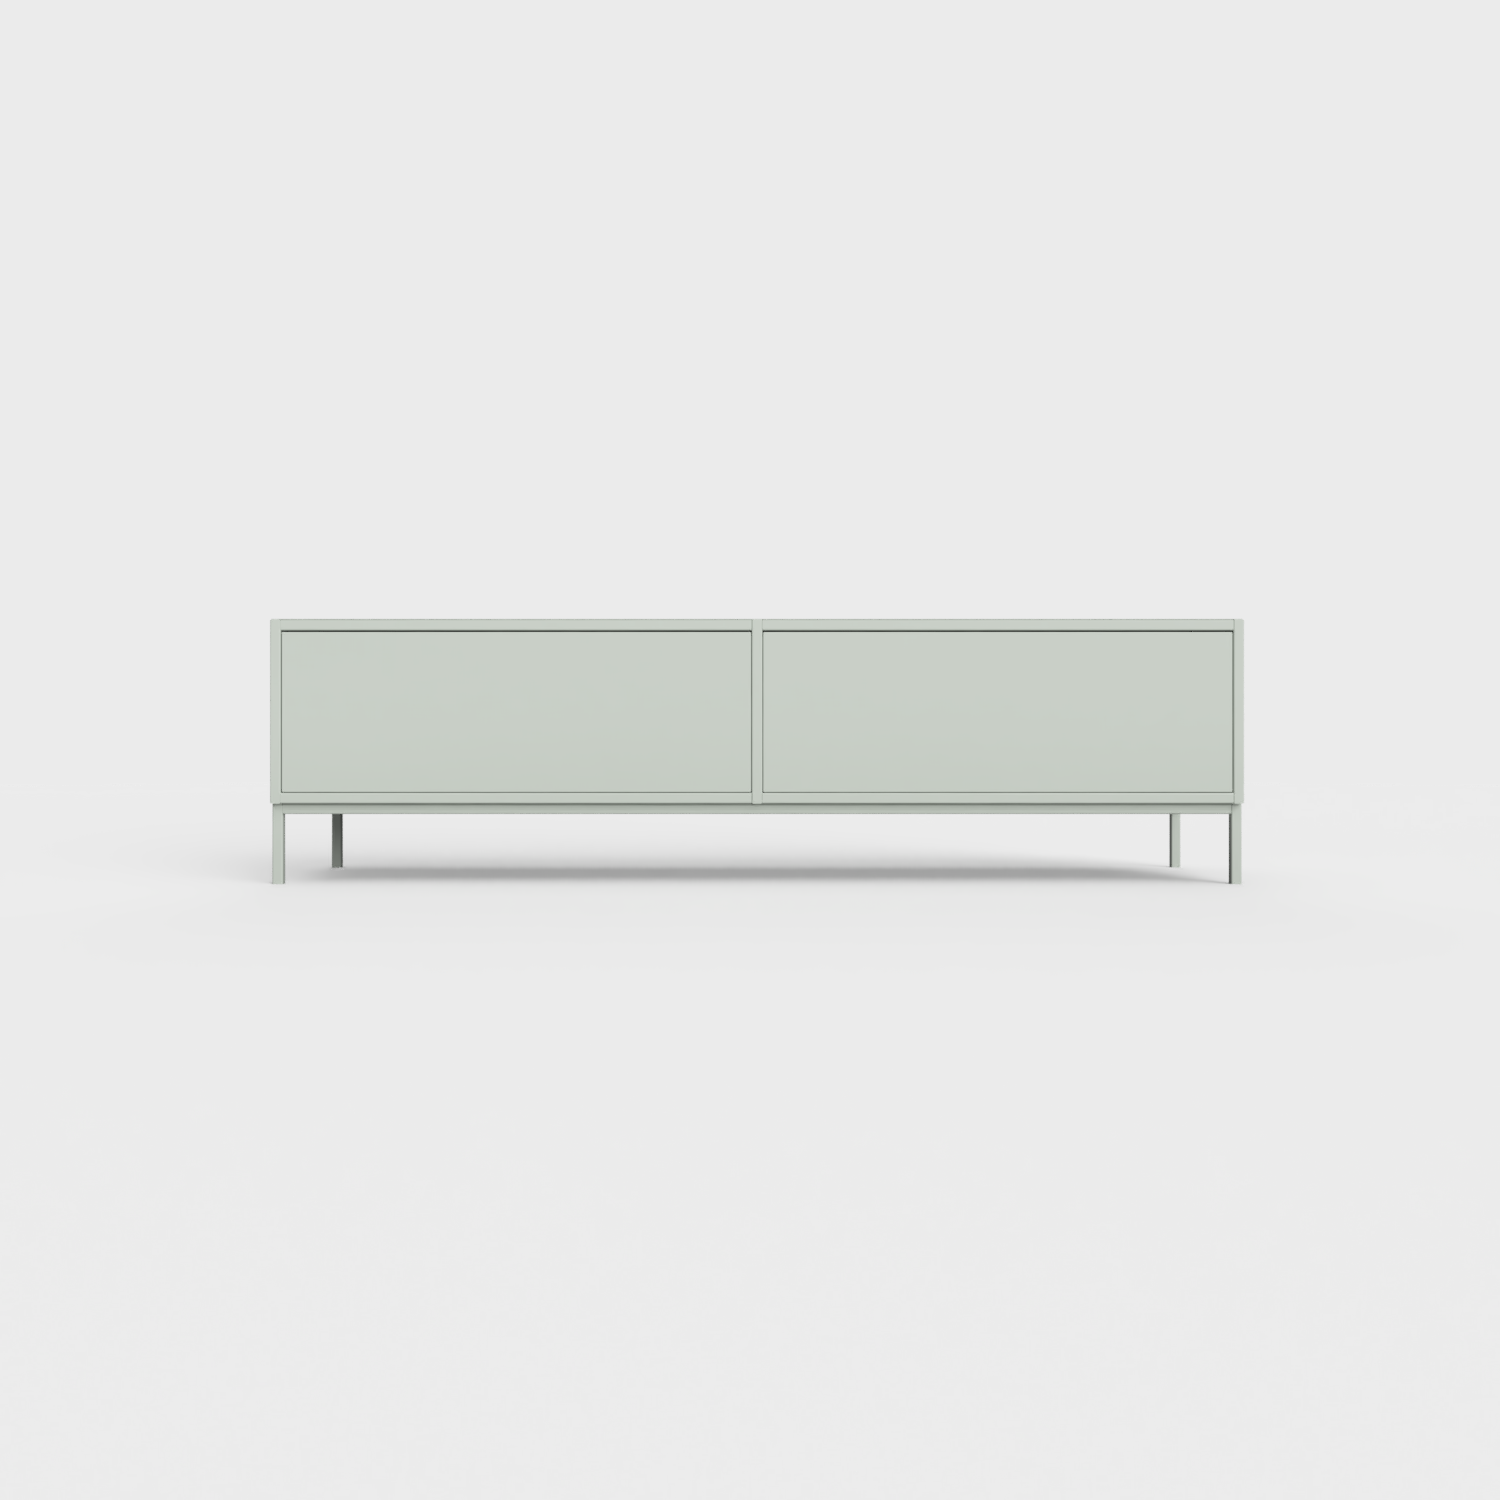 Prunus 01 Lowboard in Light Matcha Green color, powder-coated steel, elegant and modern piece of furniture for your living room